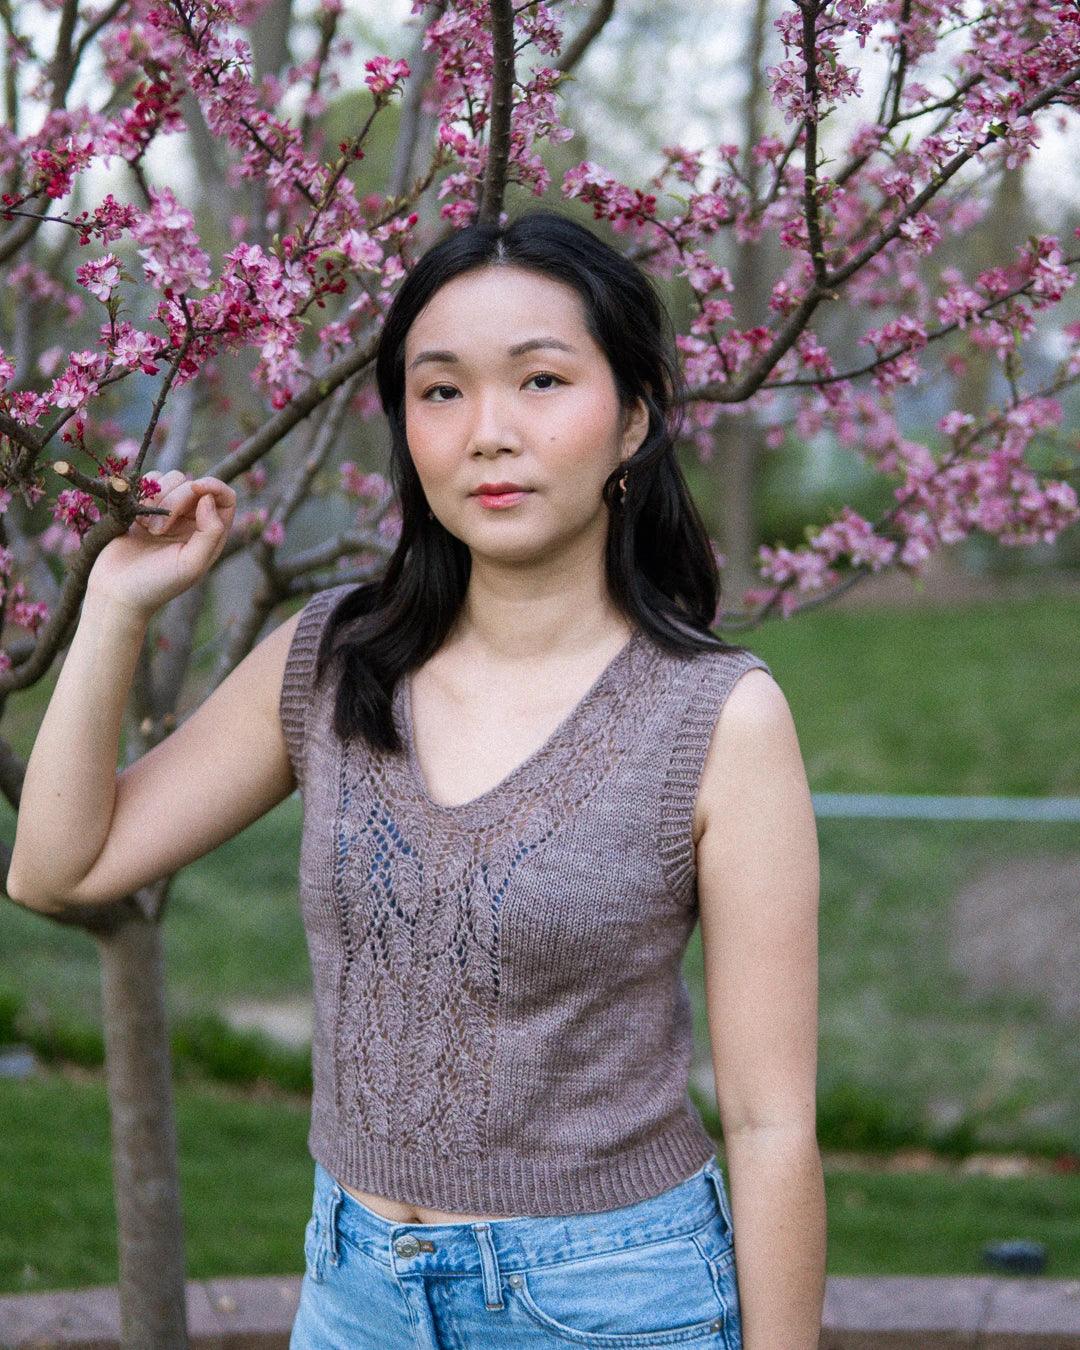 Oolong Tank - Lace Knitting Pattern (PDF) - Aimee Sher Makes